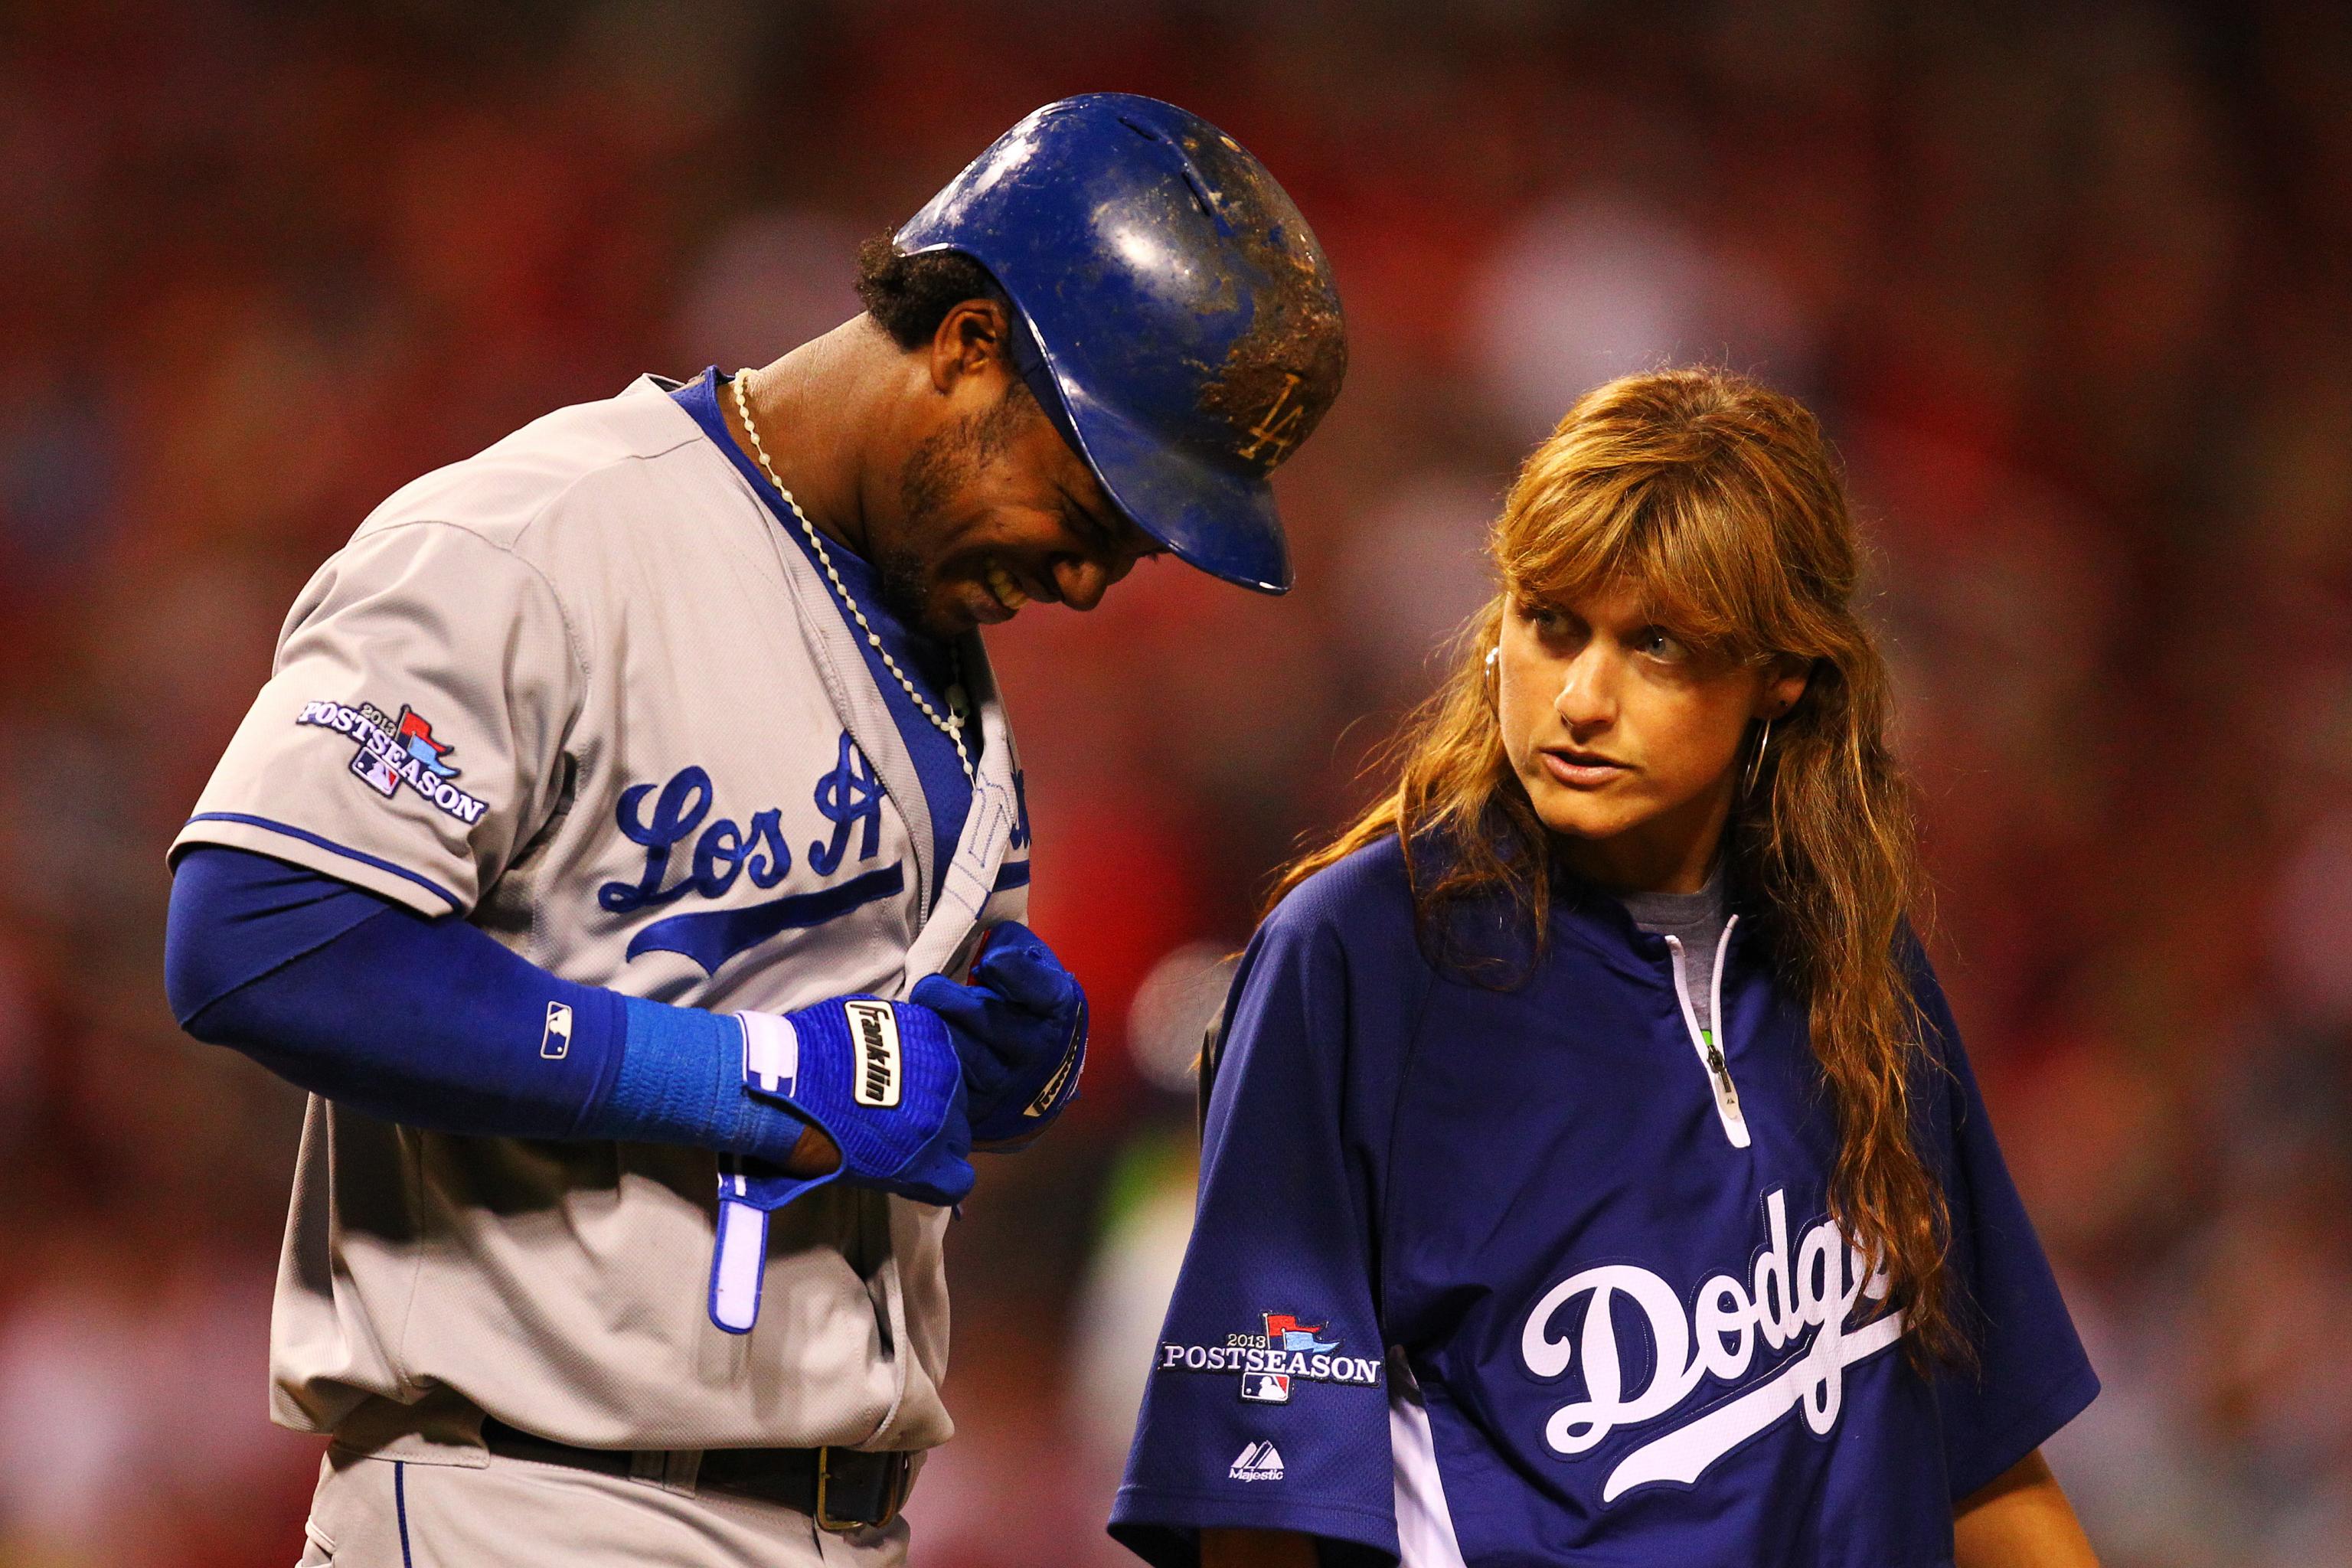 Dodgers SS Hanley Ramirez on DL with strained hamstring